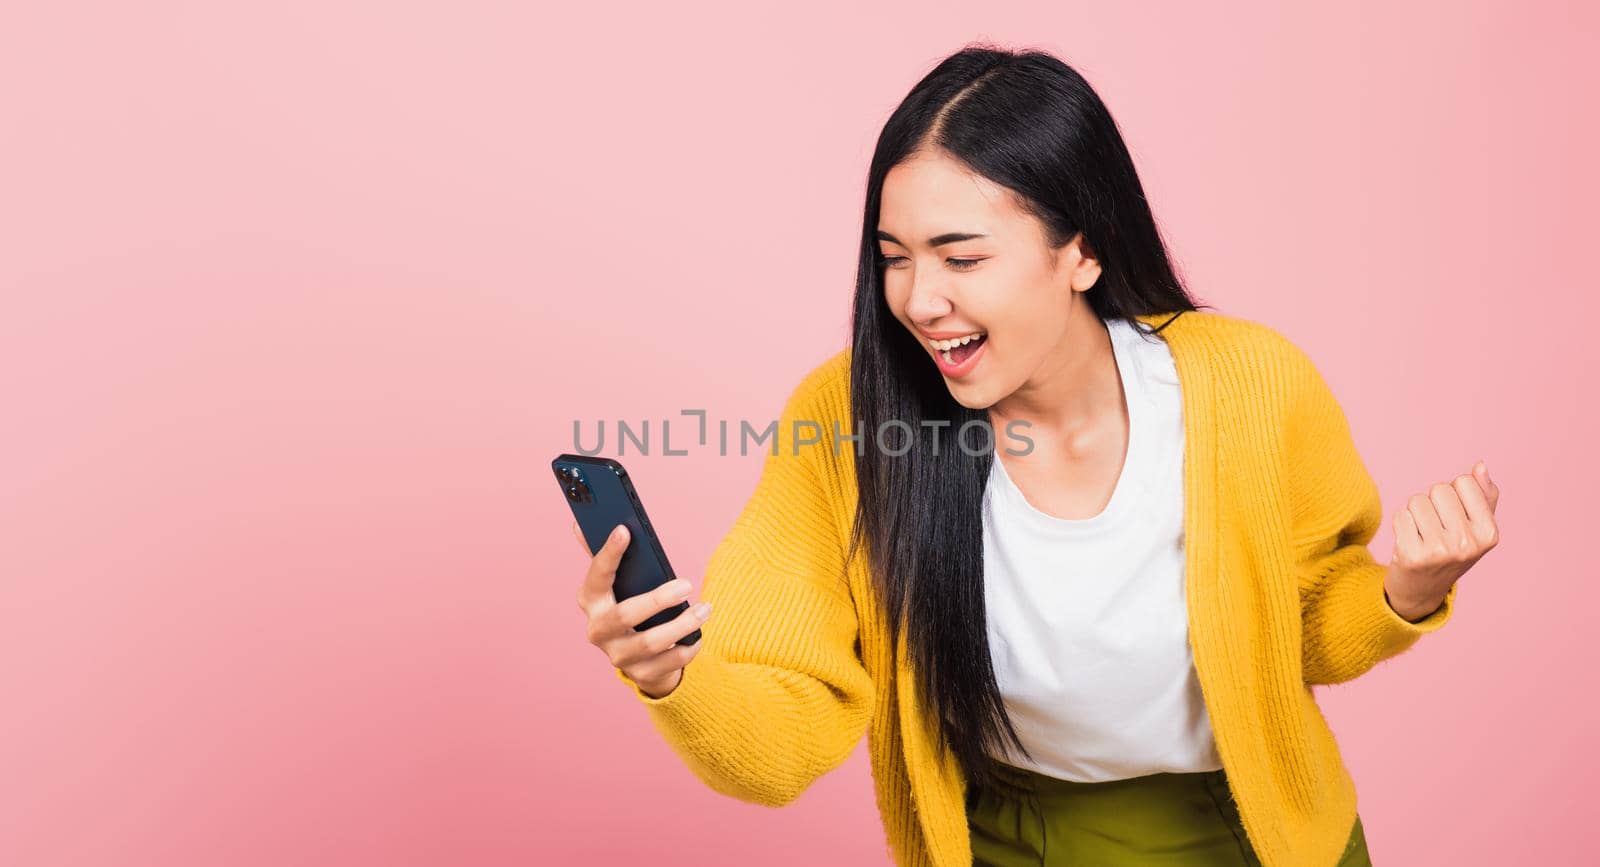 woman teen smiling excited   using mobile phone say yes!  by Sorapop